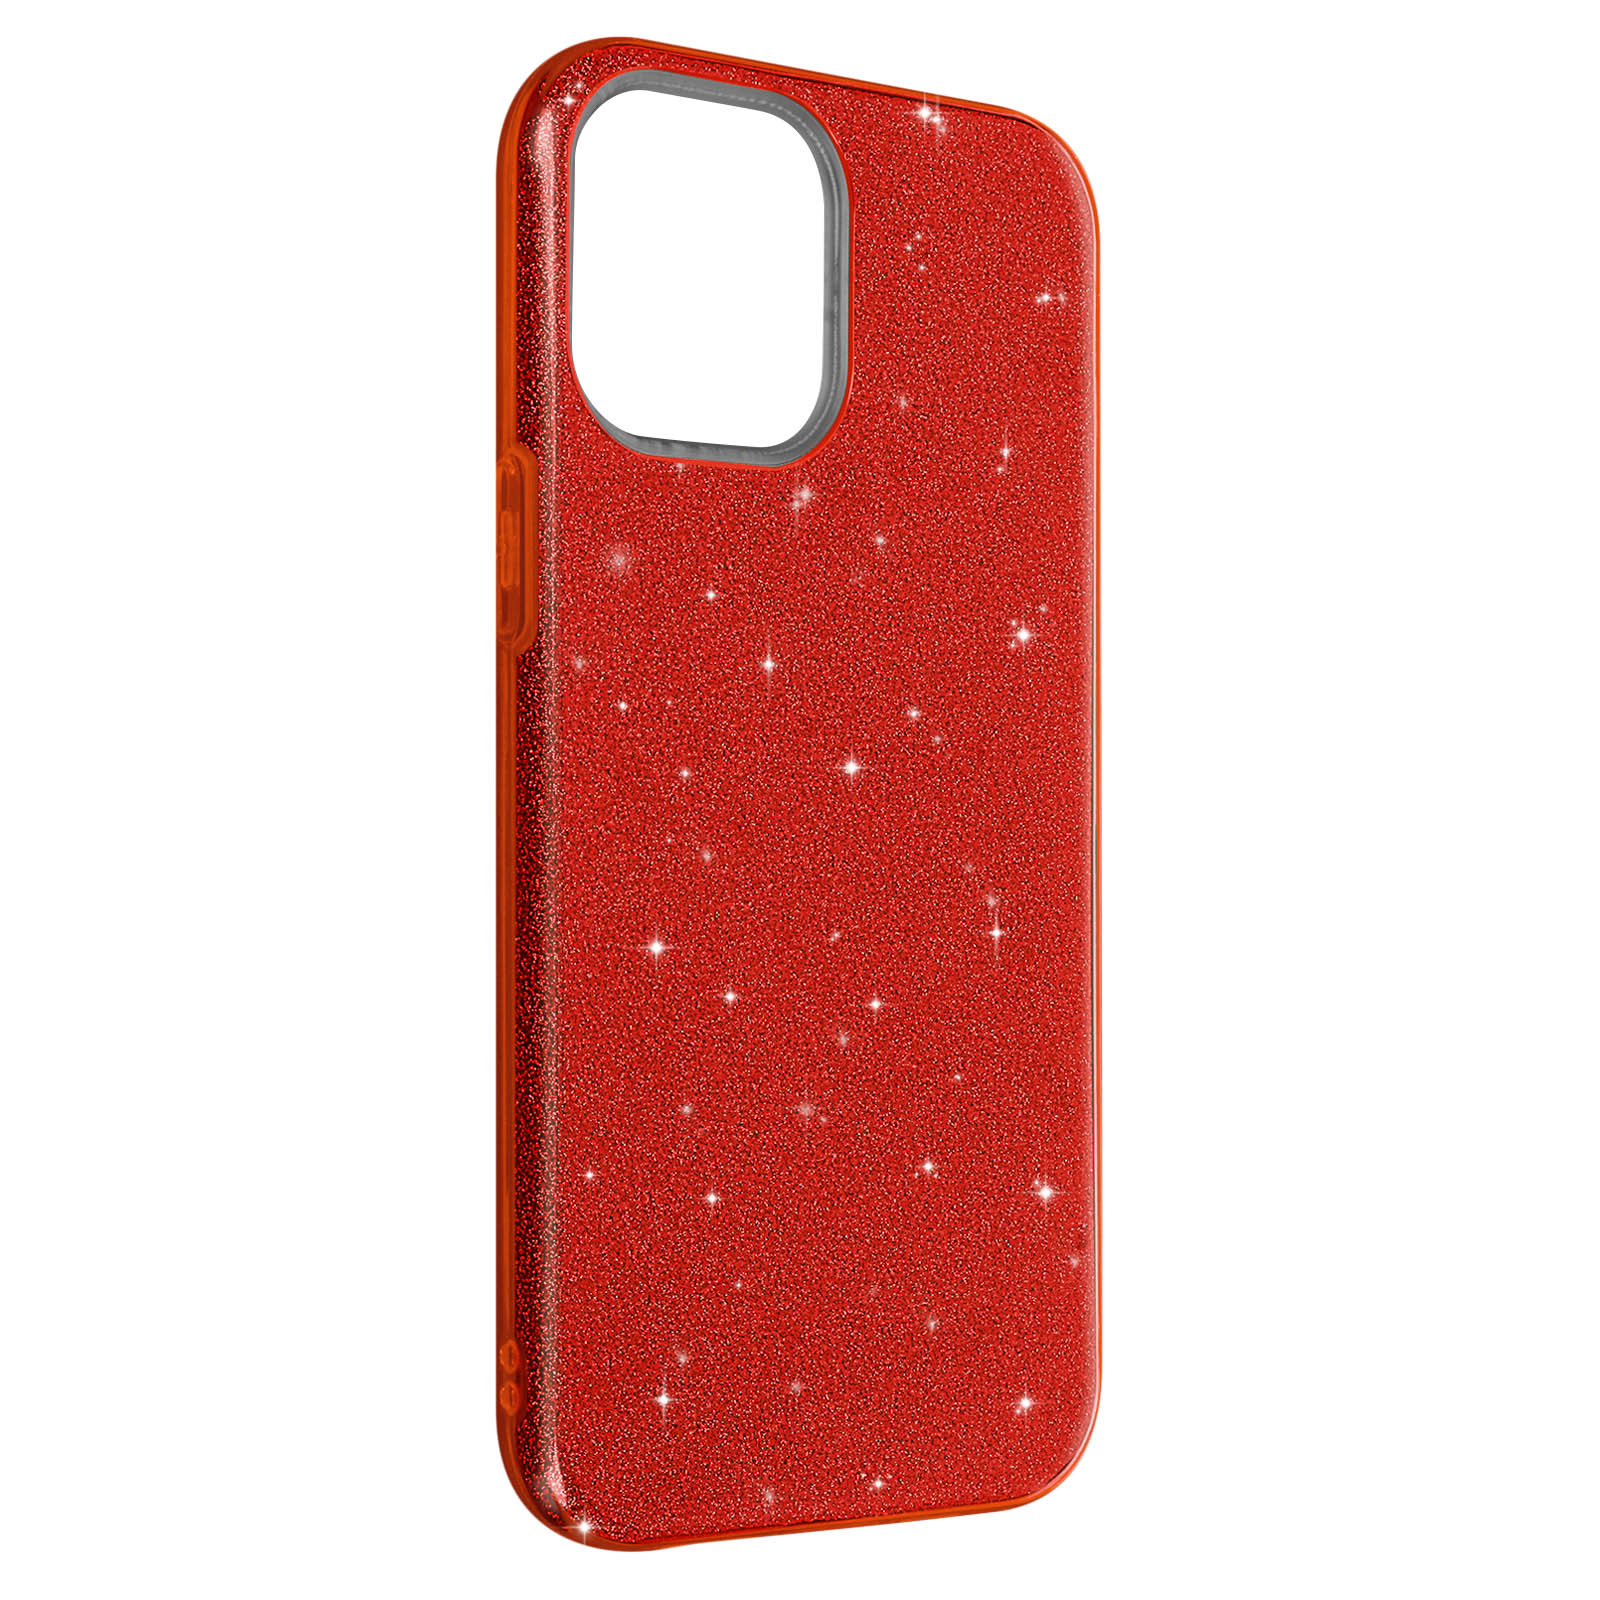 Pro AVIZAR iPhone Apple, Max, Backcover, 12 Series, Rot Papay